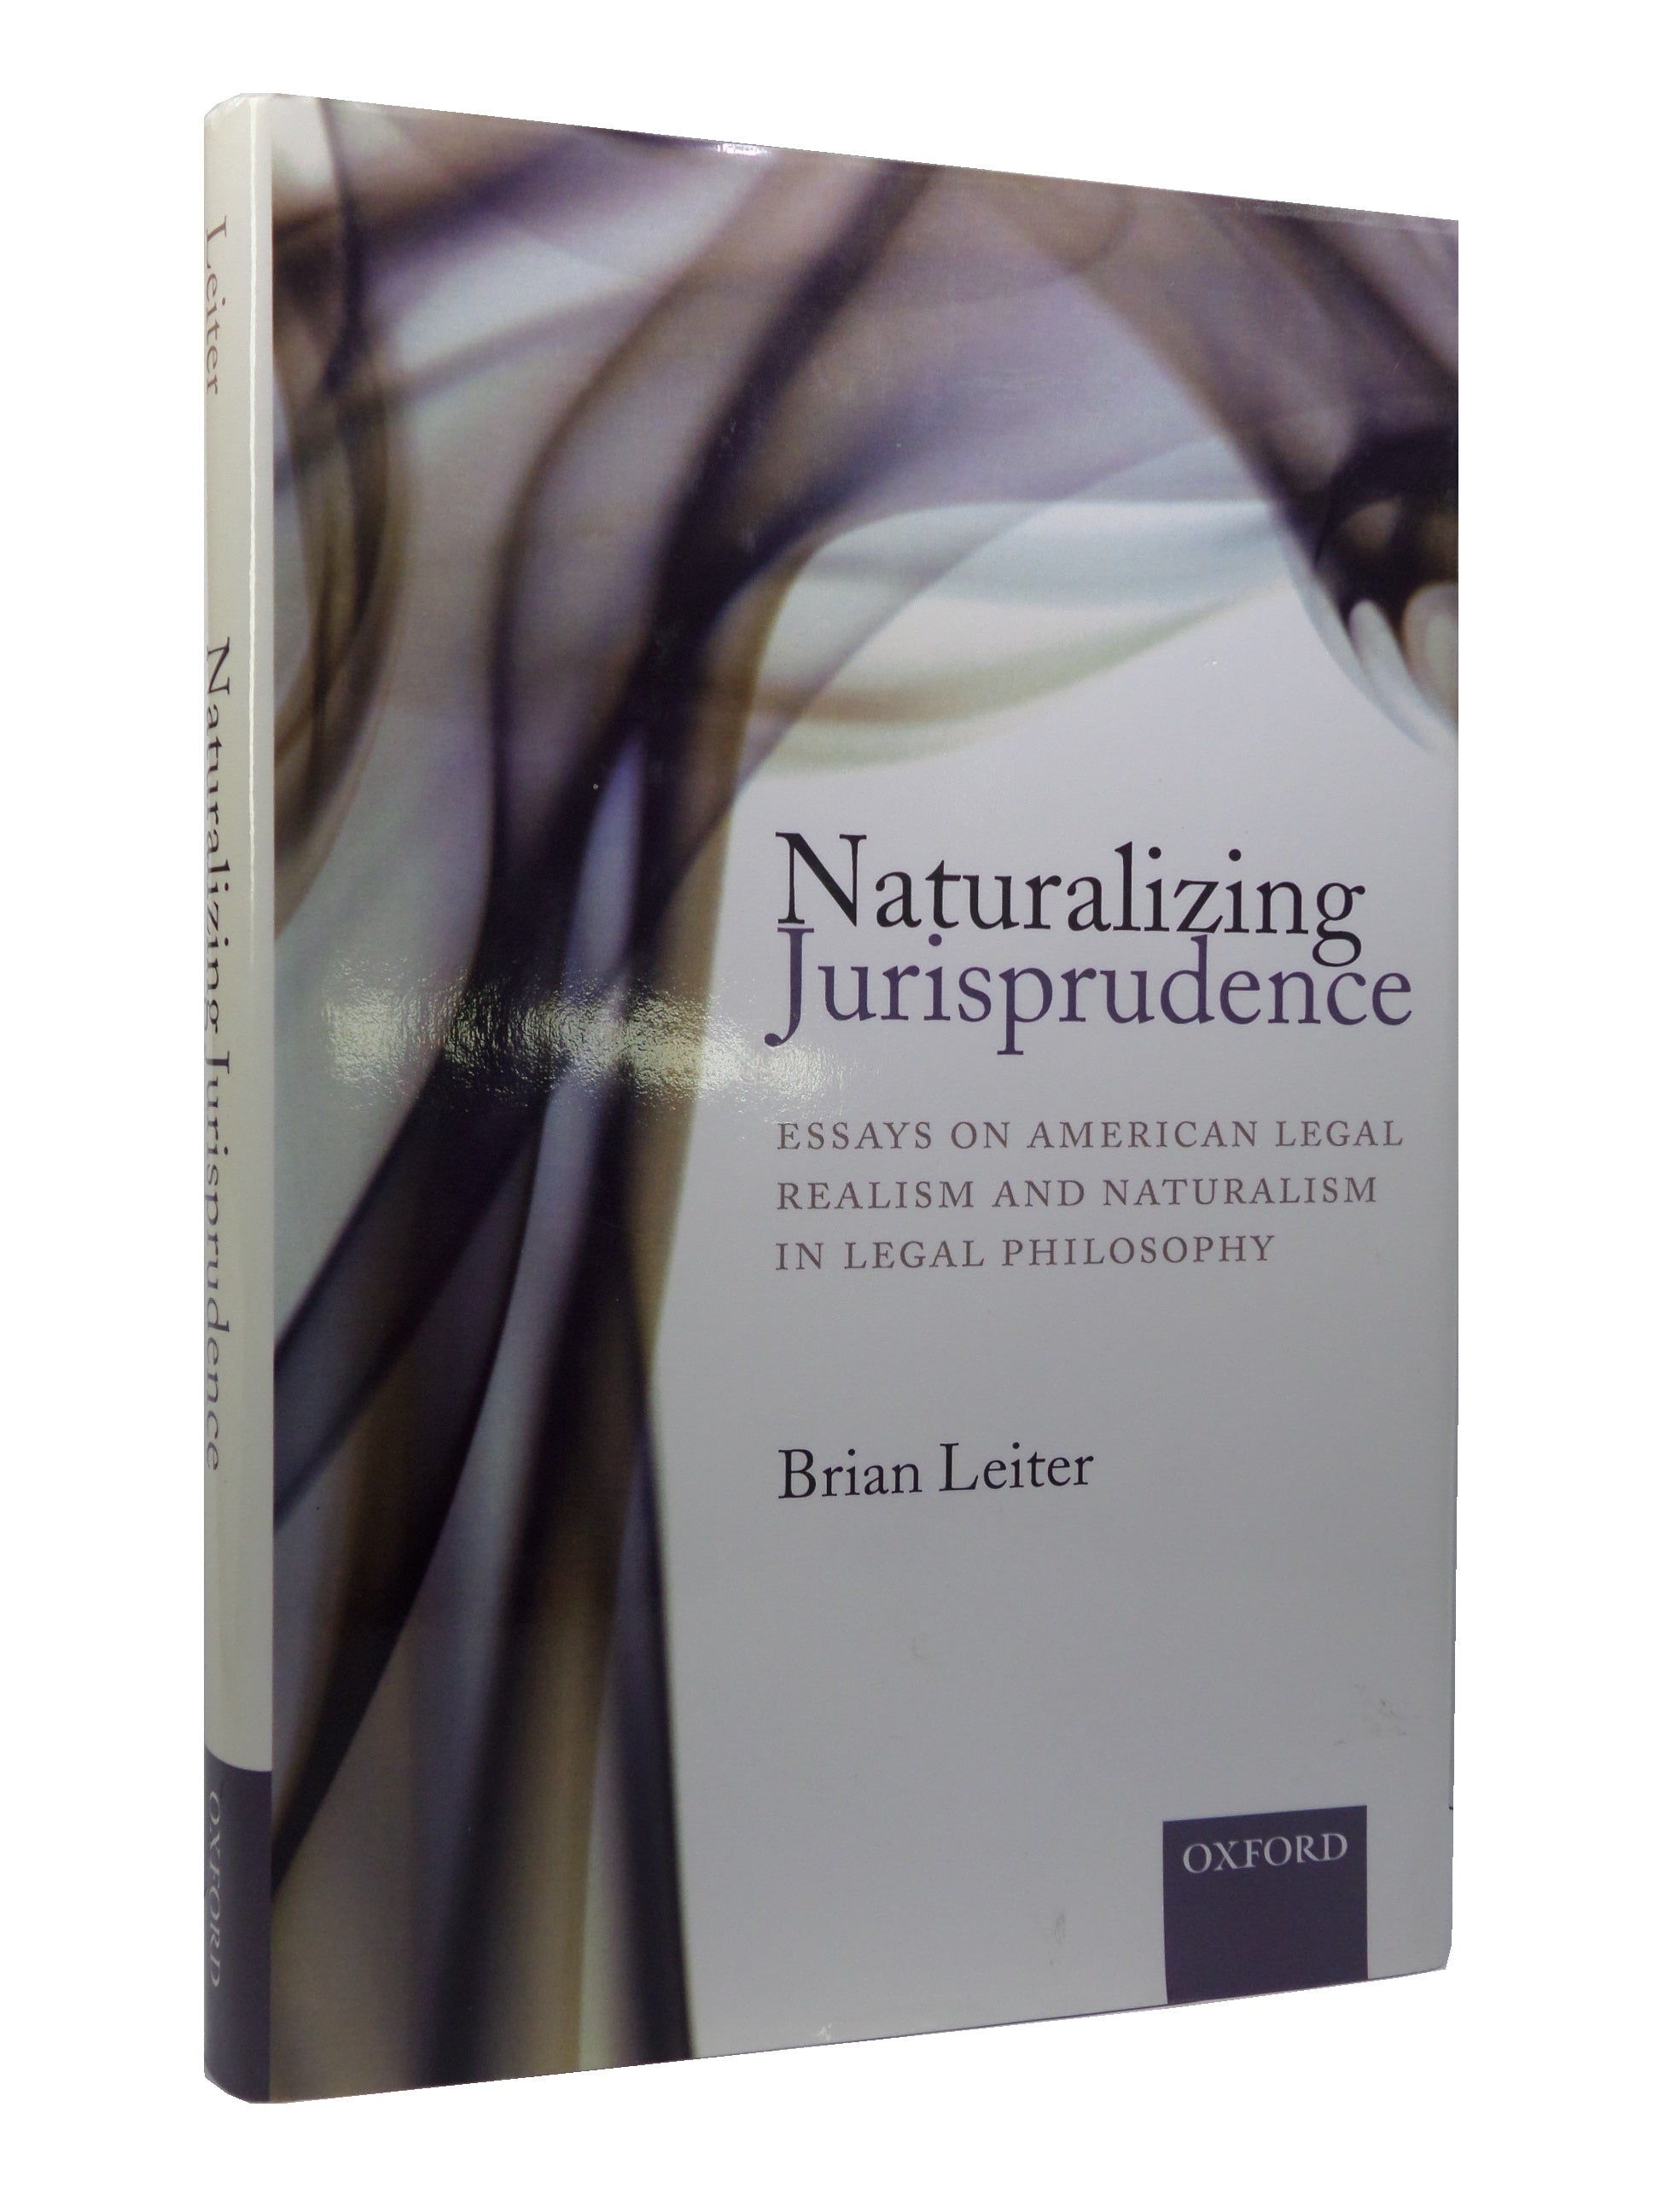 NATURALIZING JURISPRUDENCE: ESSAYS ON AMERICAN LEGAL REALISM... BY BRIAN LEITER